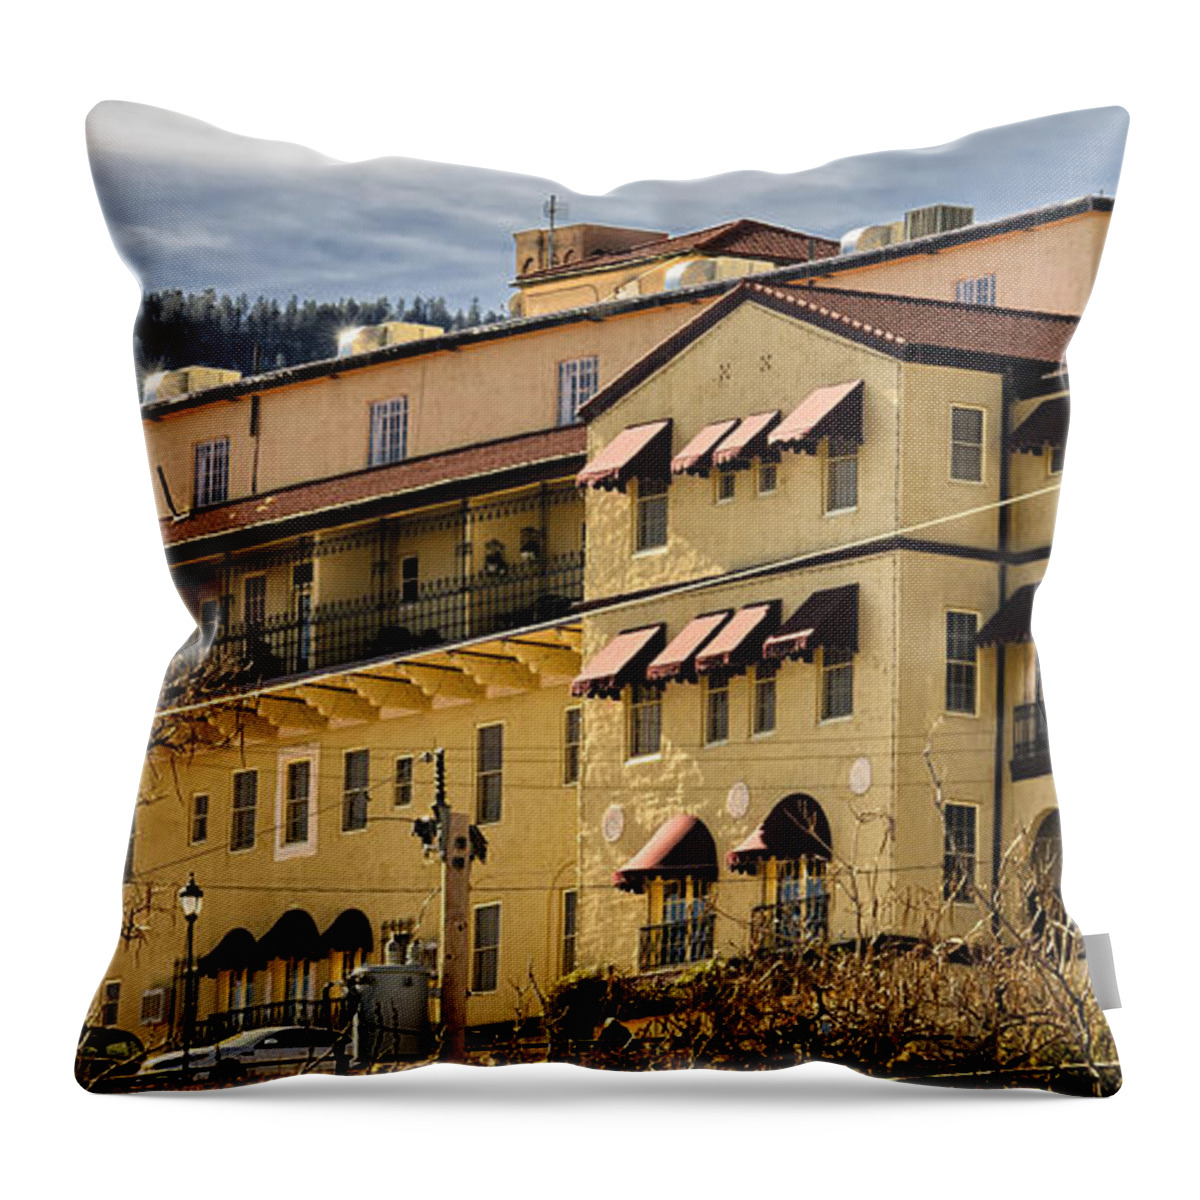 2014 Throw Pillow featuring the photograph Jerome Grand Hotel No.18 by Mark Myhaver